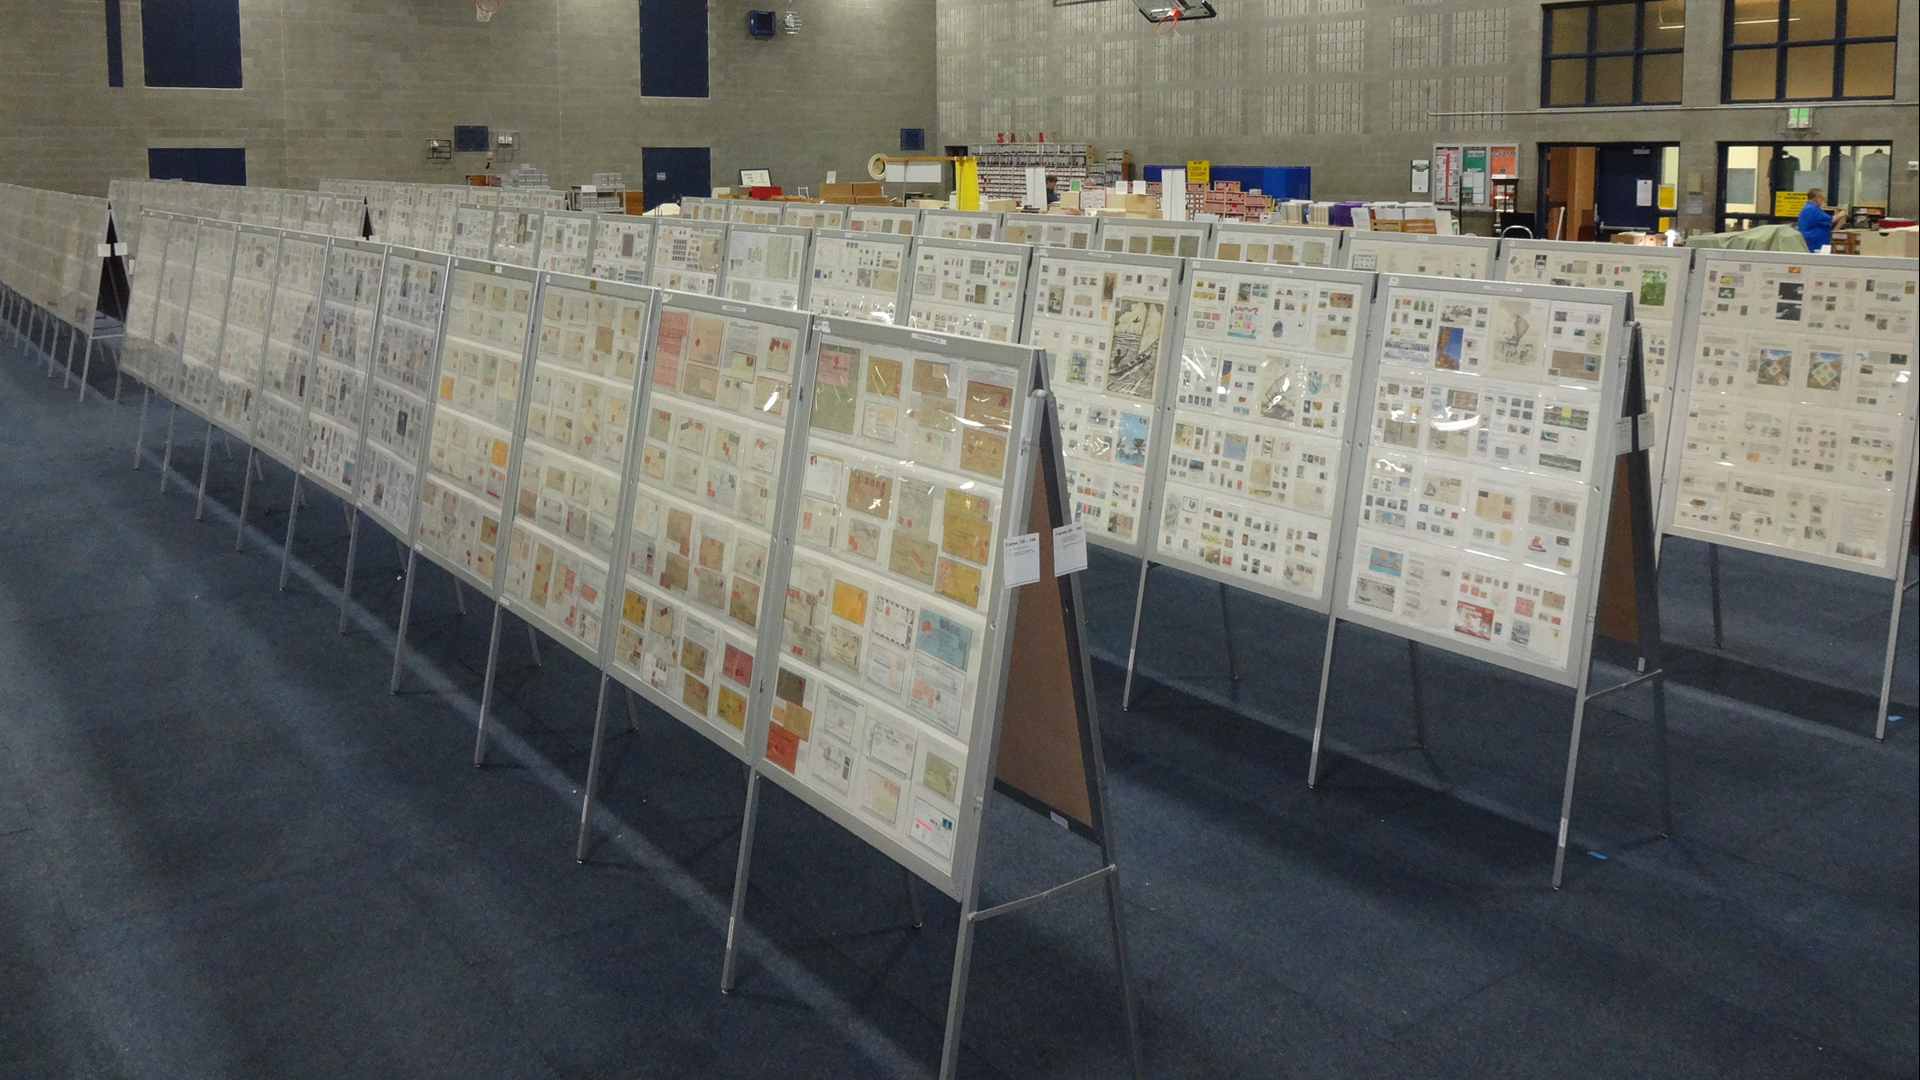 The largest stamp show in the state of Washington is at the Tukwila Community Center from September 13-15.